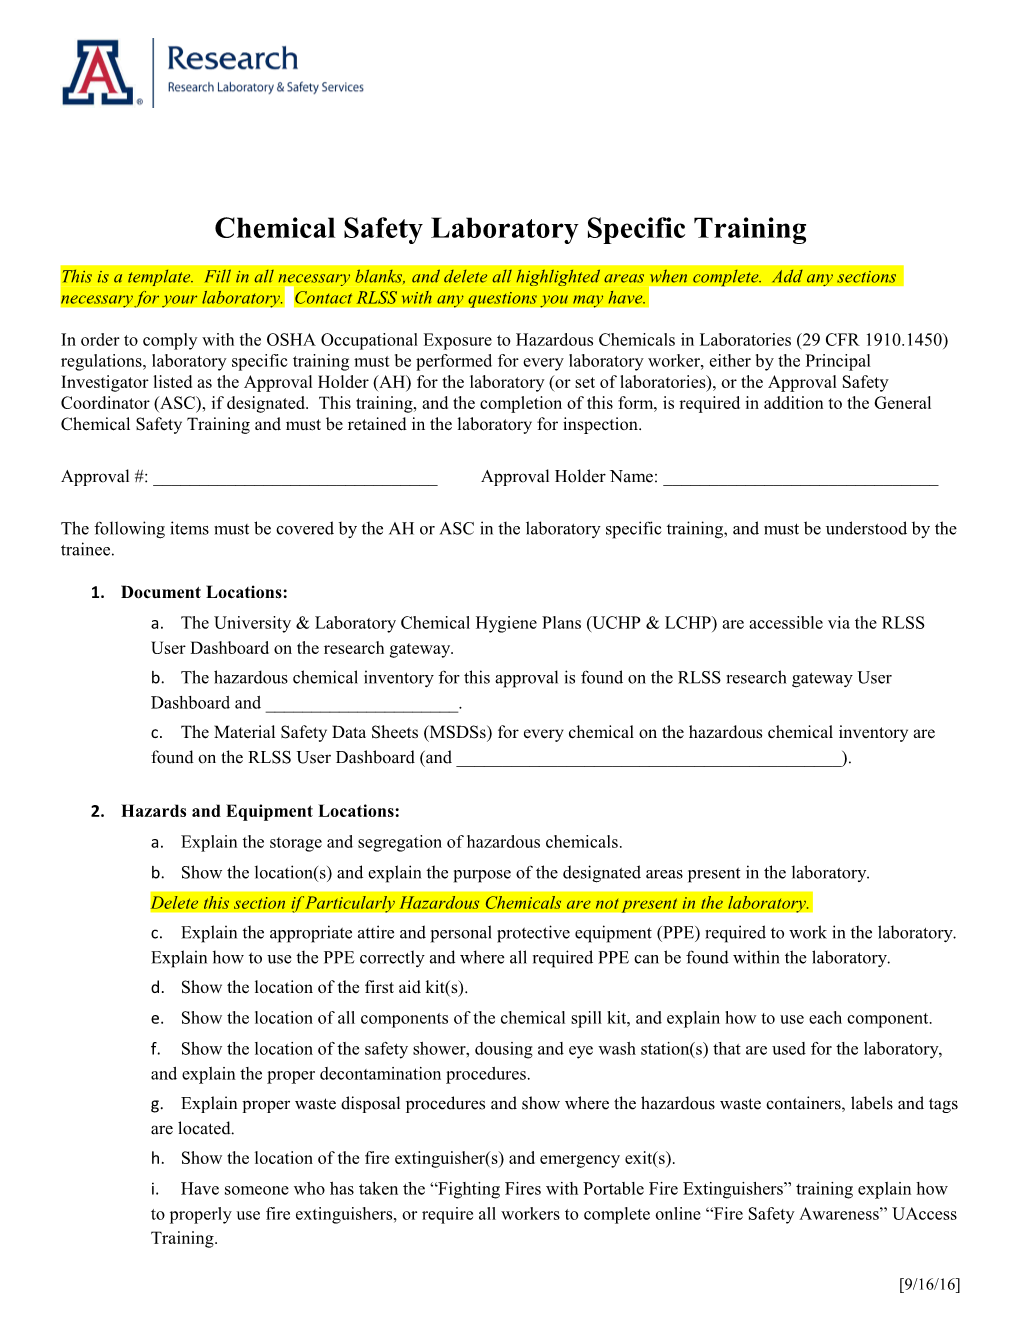 Chemical Safety Laboratory Specific Training